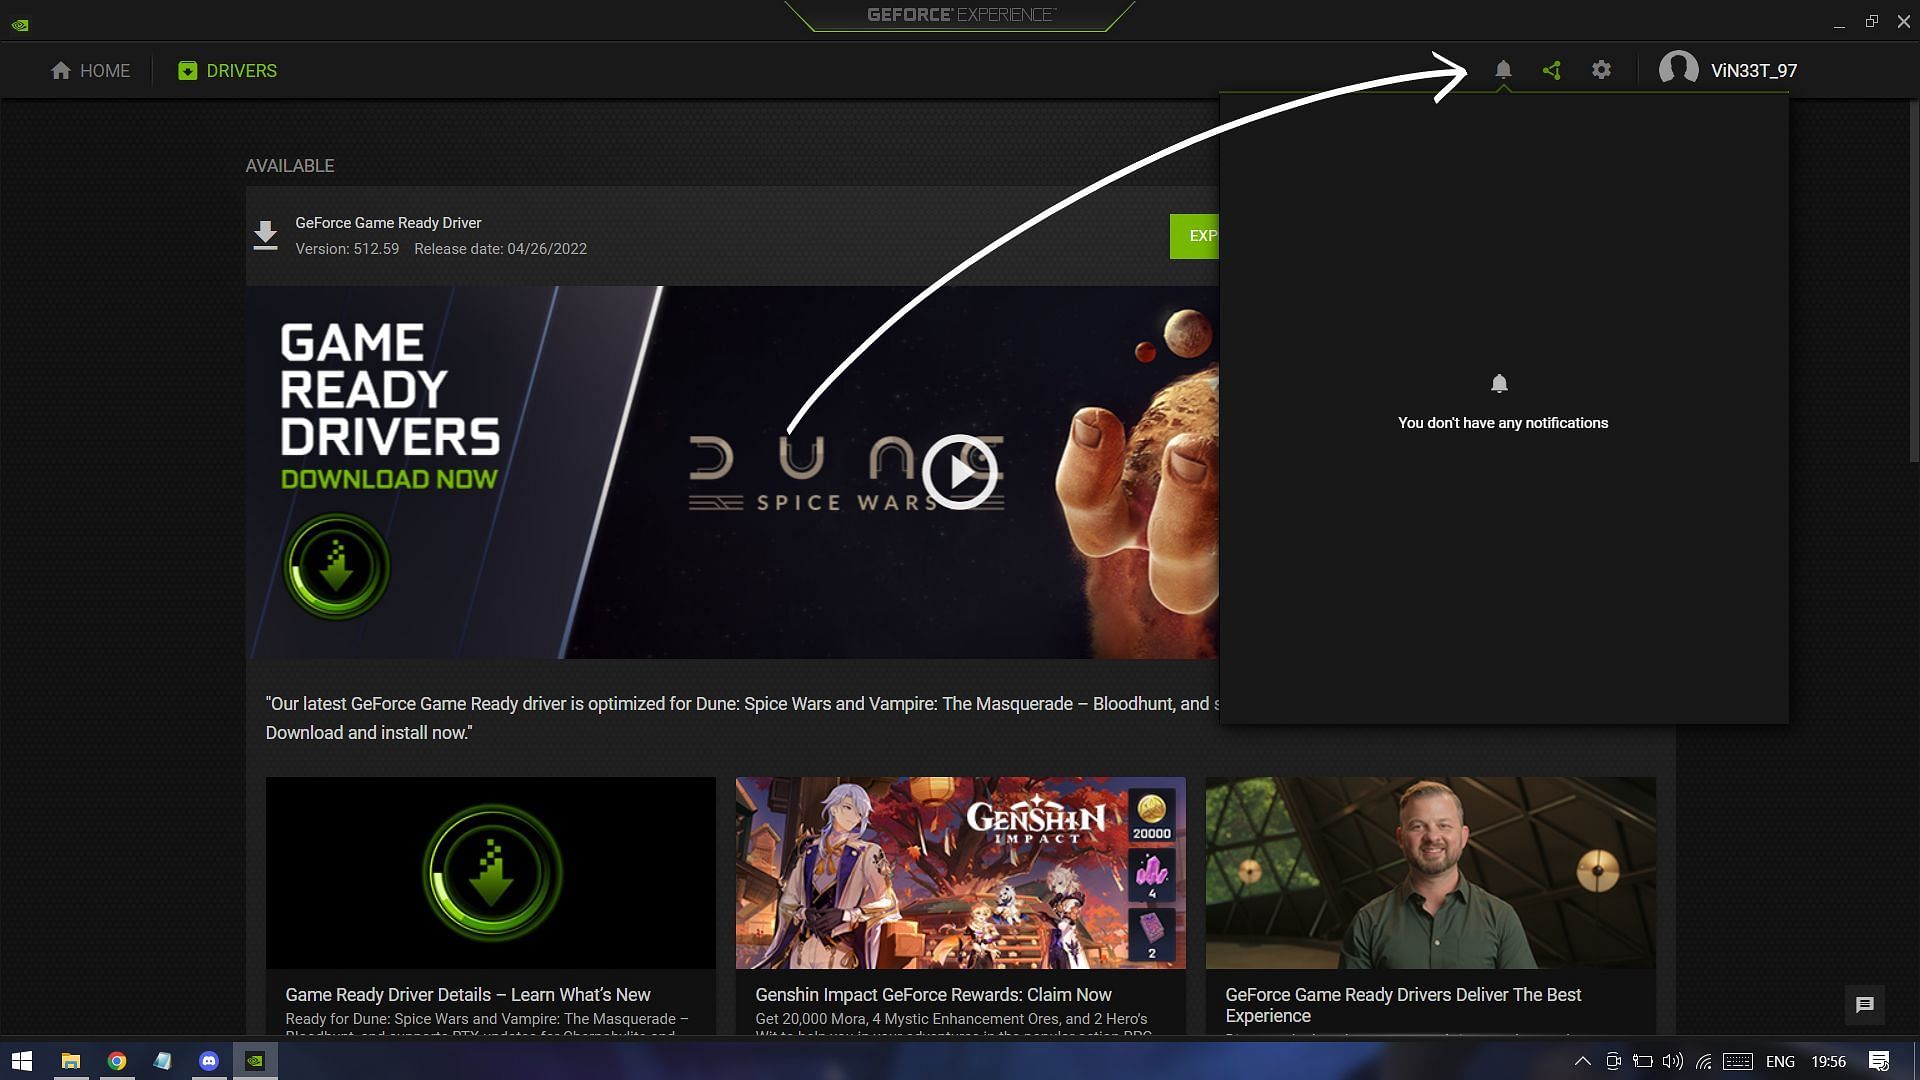 Genshin Impact redeem code for Nvidia GeForce experience rewards All